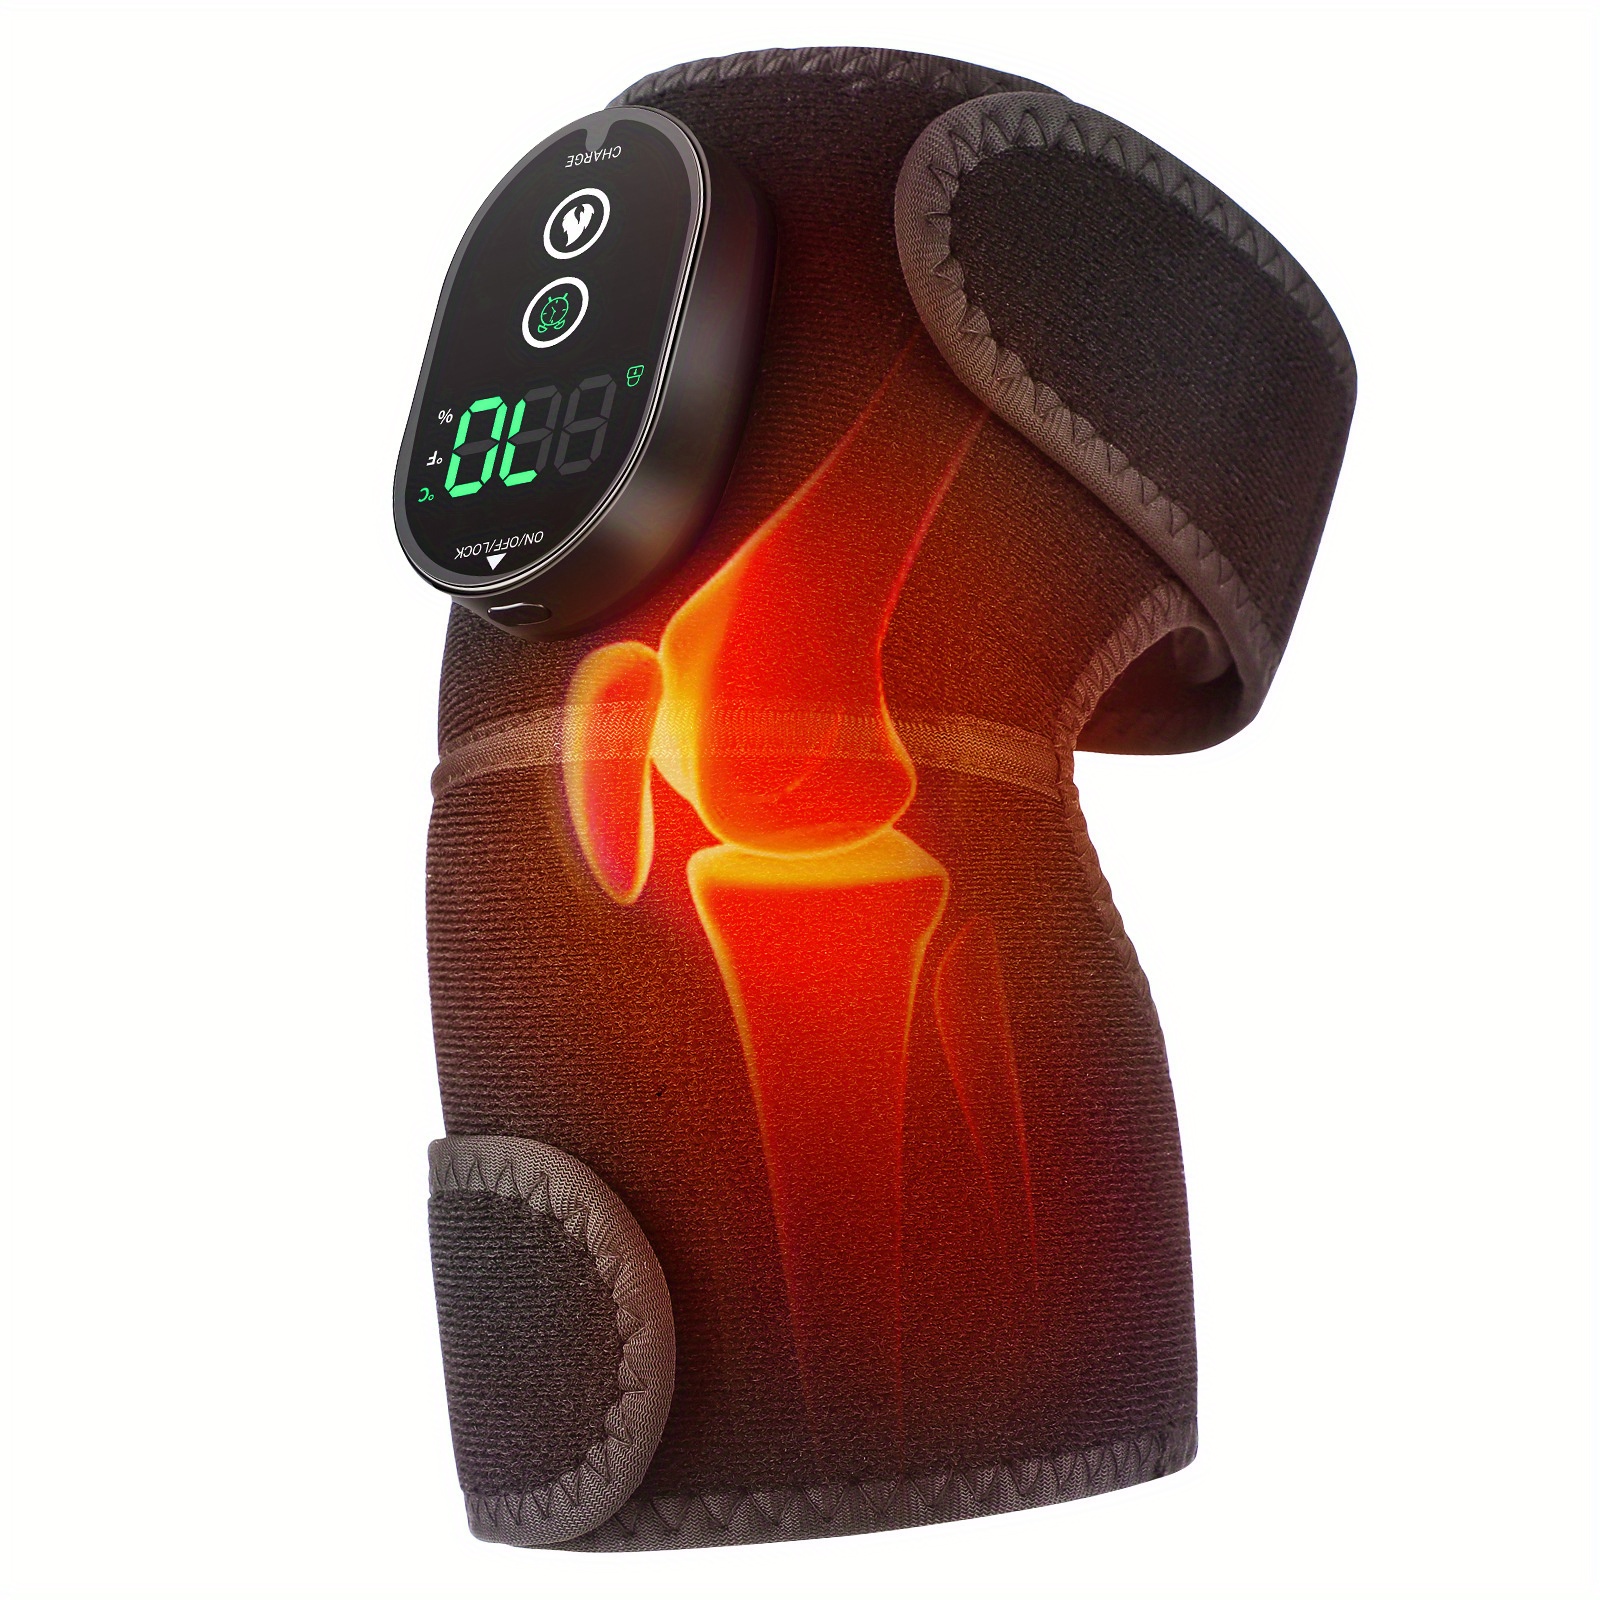 Wireless Electric Shoulder Heating Pad Massager Massage Heated Wrap Braces  for Left Right Shoulder 3 Vibration and Temperature Settings LED Display